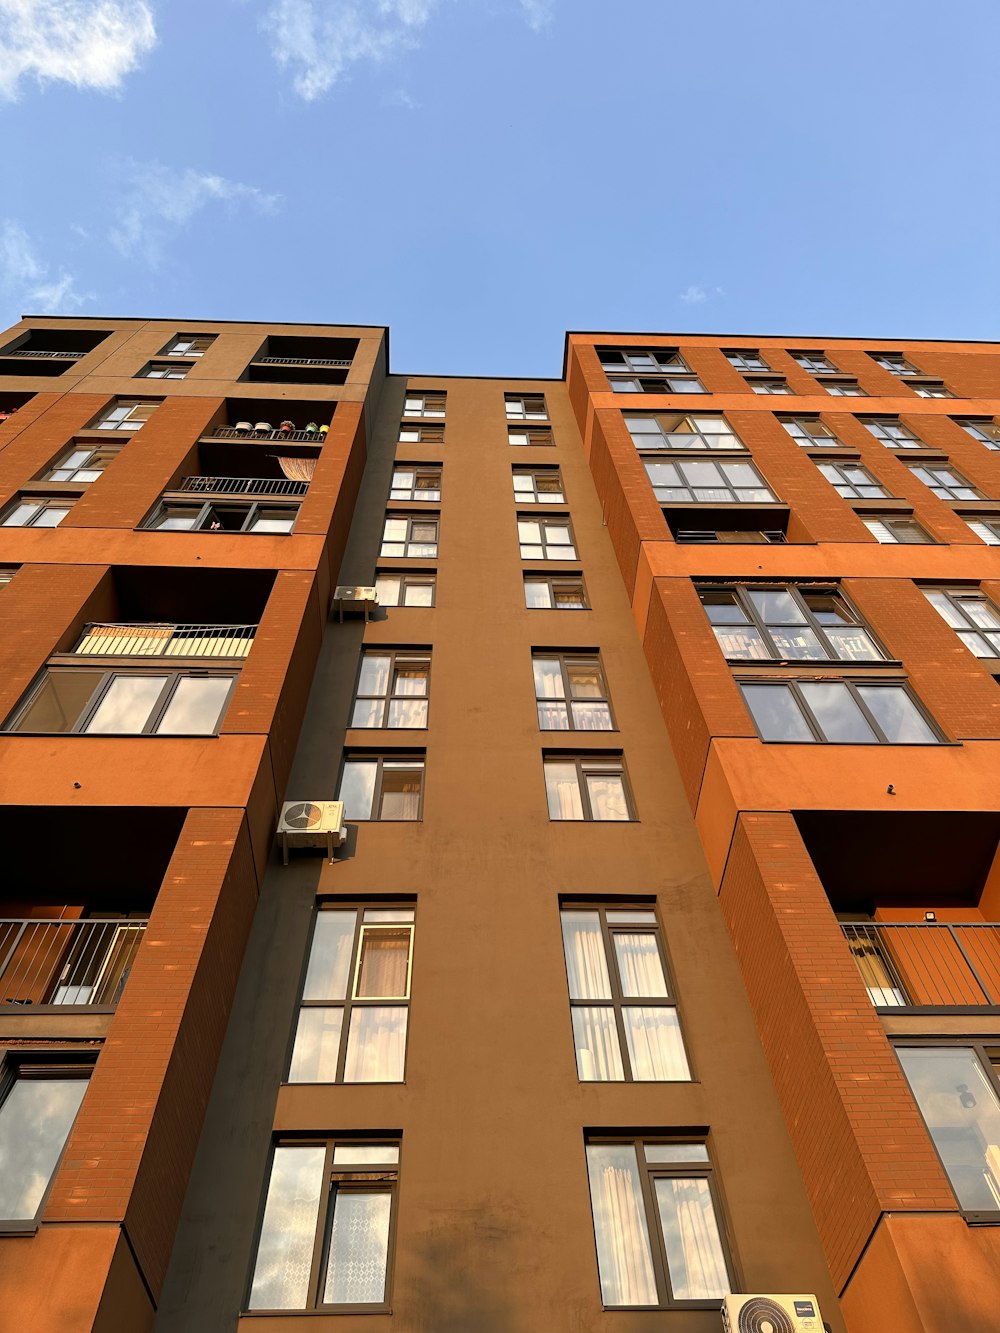 a tall orange building with lots of windows